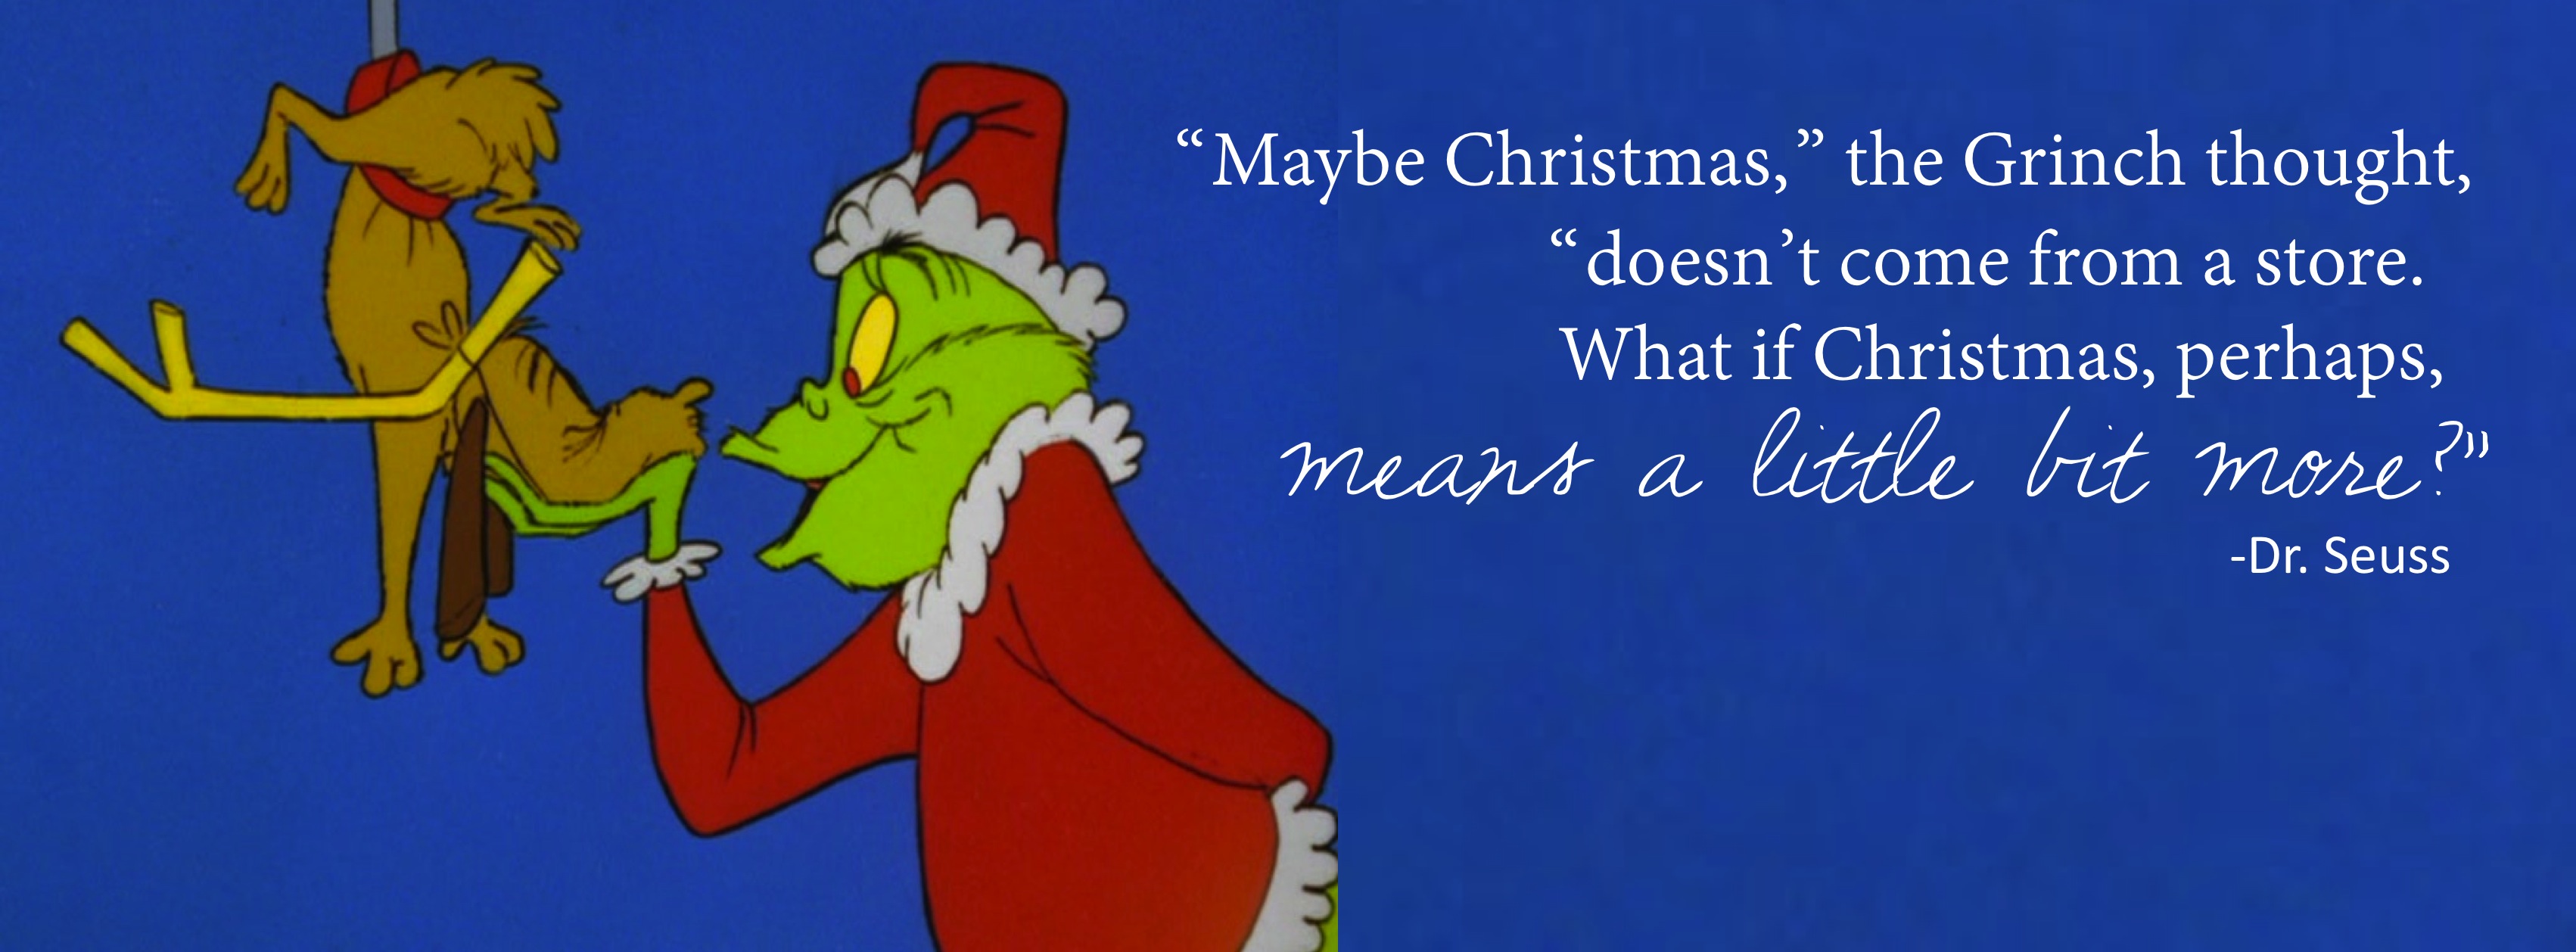 Grinch Image Thecelebritypix